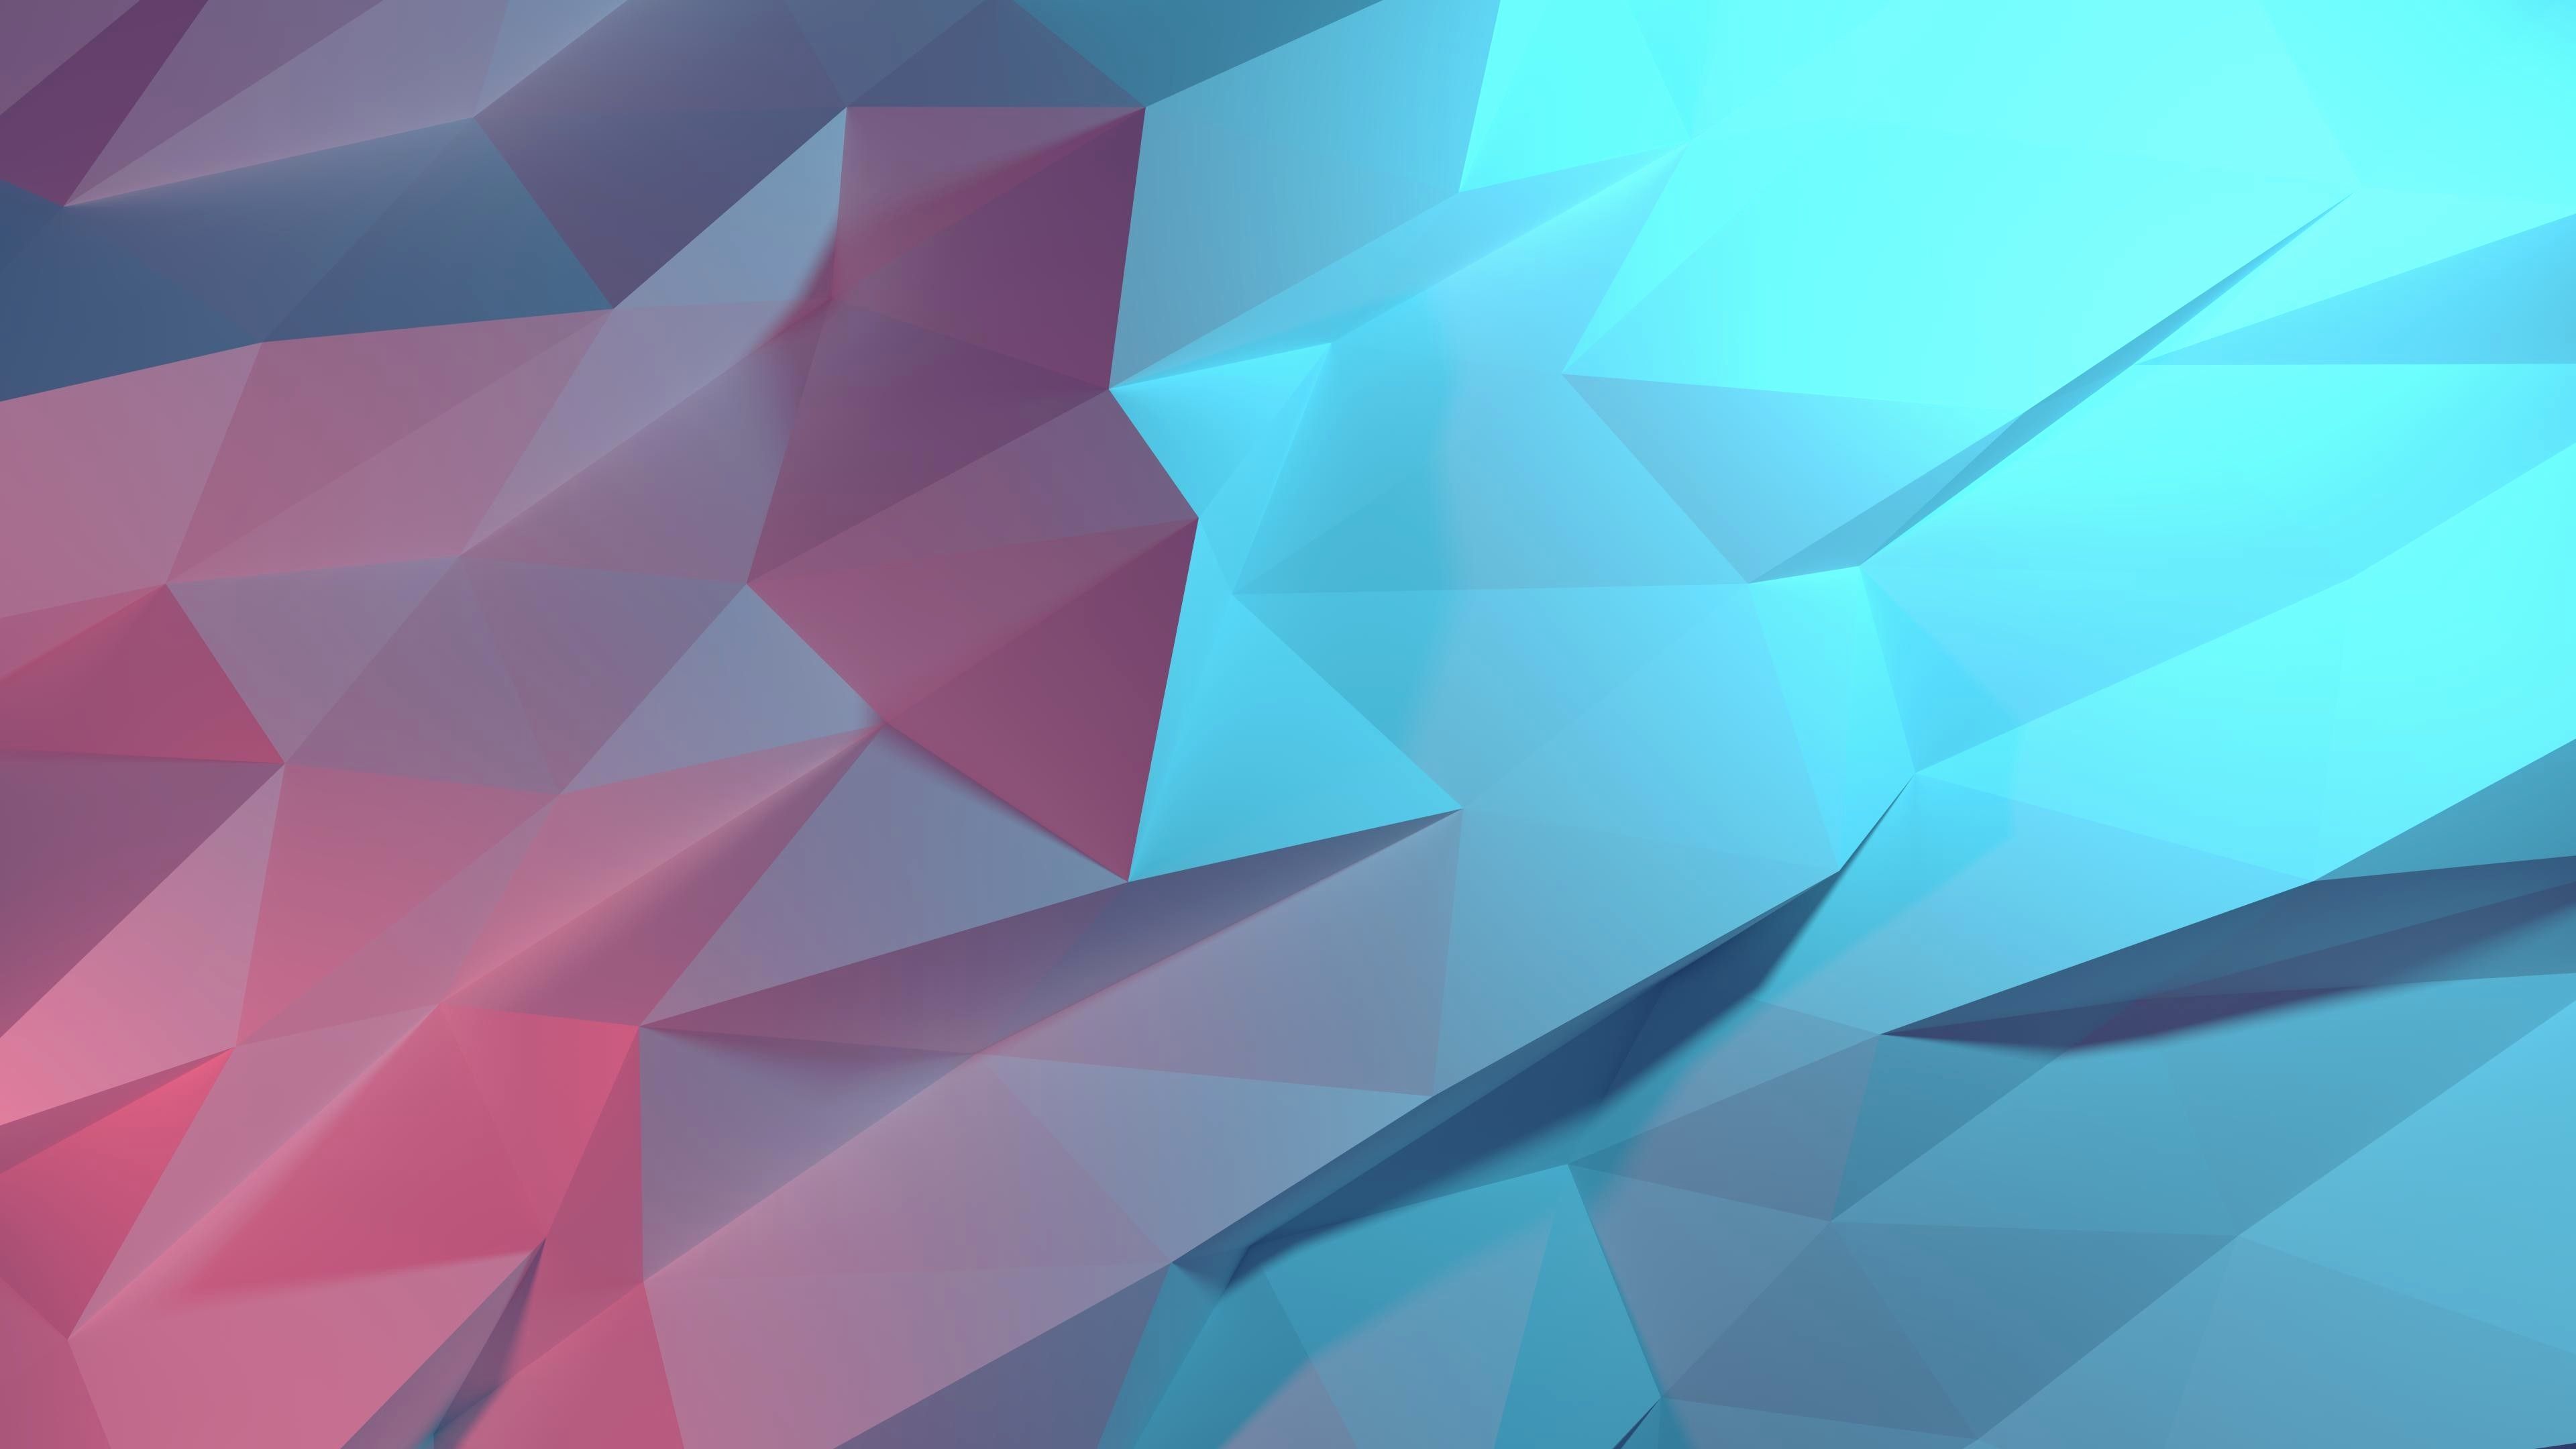 Low Poly Wallpaper 1920x1080 Best Of Low Poly Wallpaper 79 Image